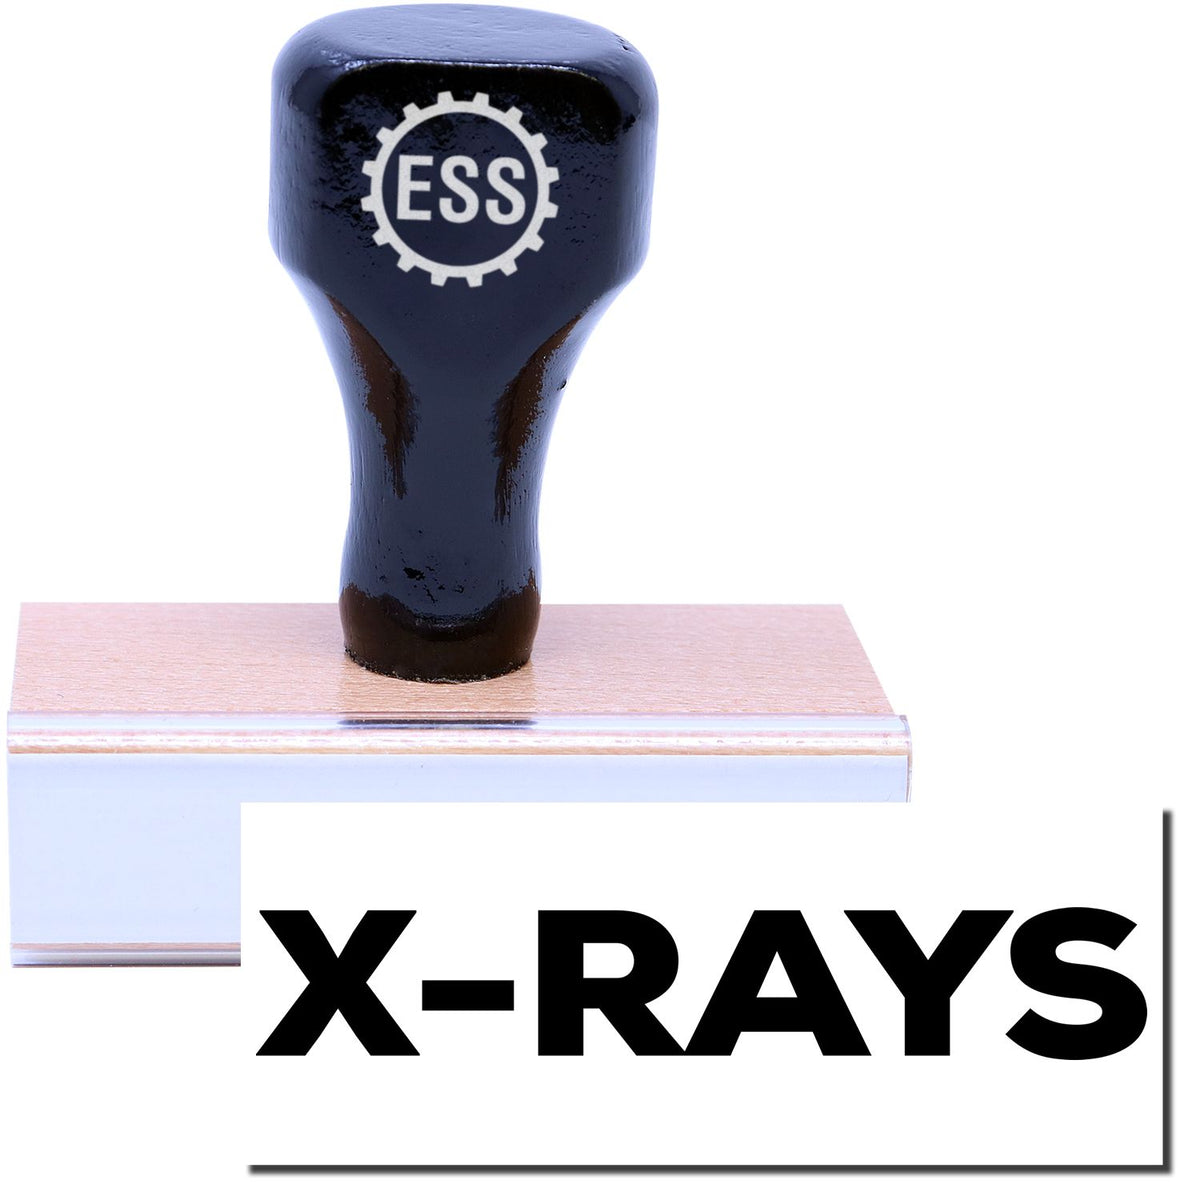 A stock office rubber stamp with a stamped image showing how the text &quot;X-RAYS&quot; in a large bold font is displayed after stamping.